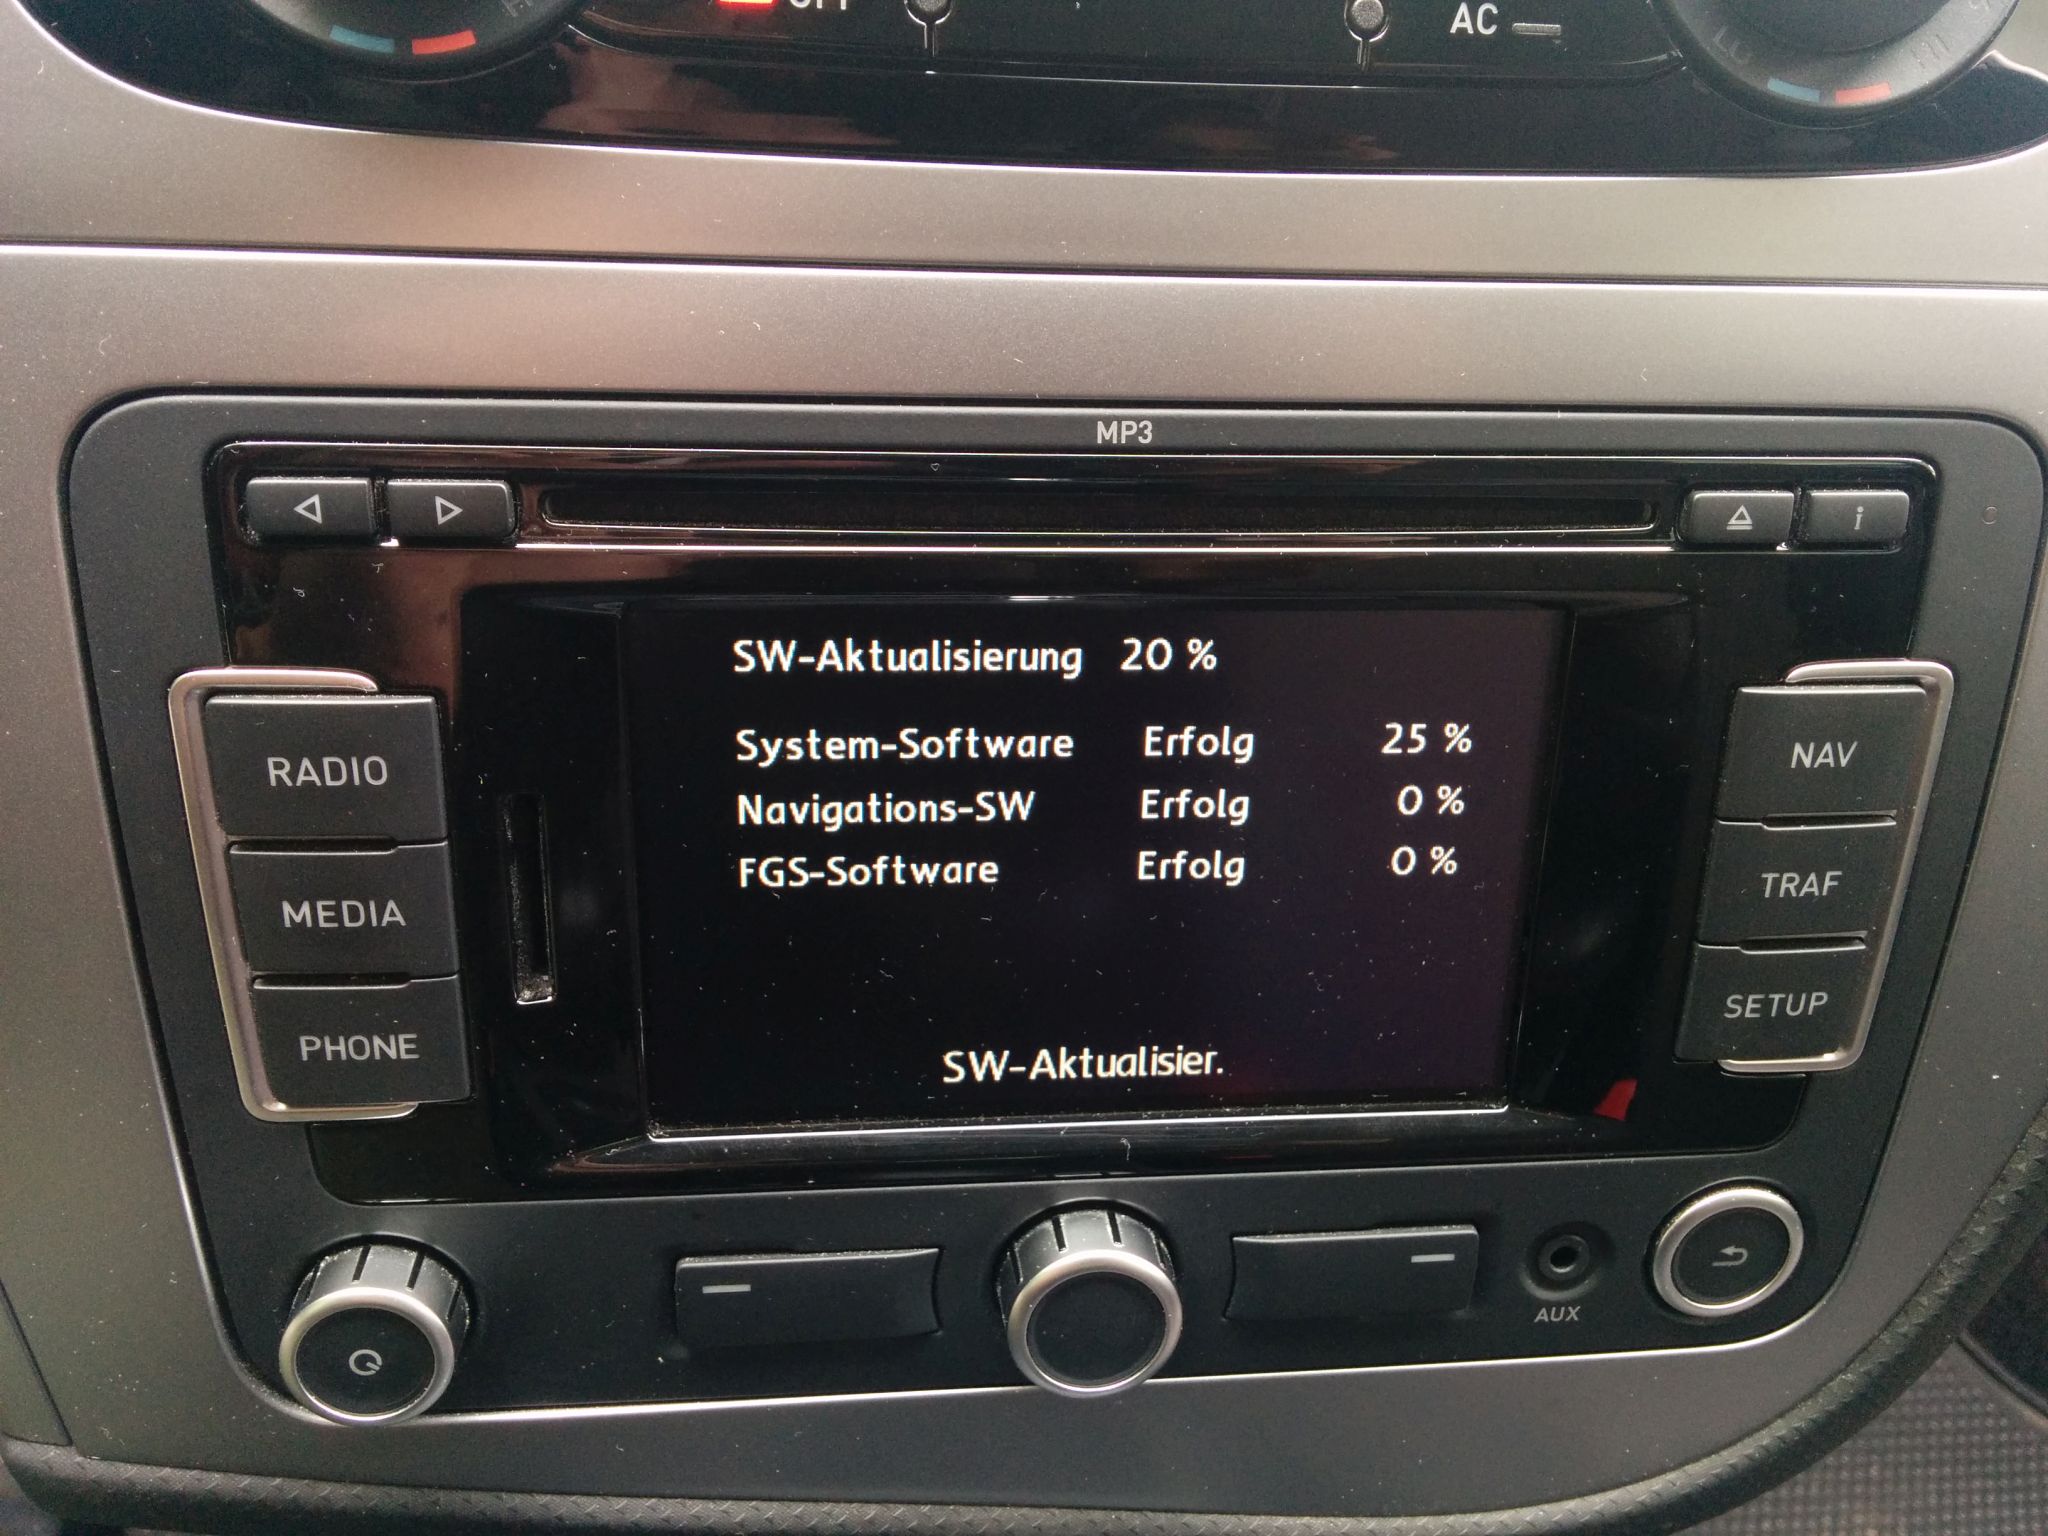 Vw Rns 310 Firmware Update Extra Quality IMG_20150510_113816